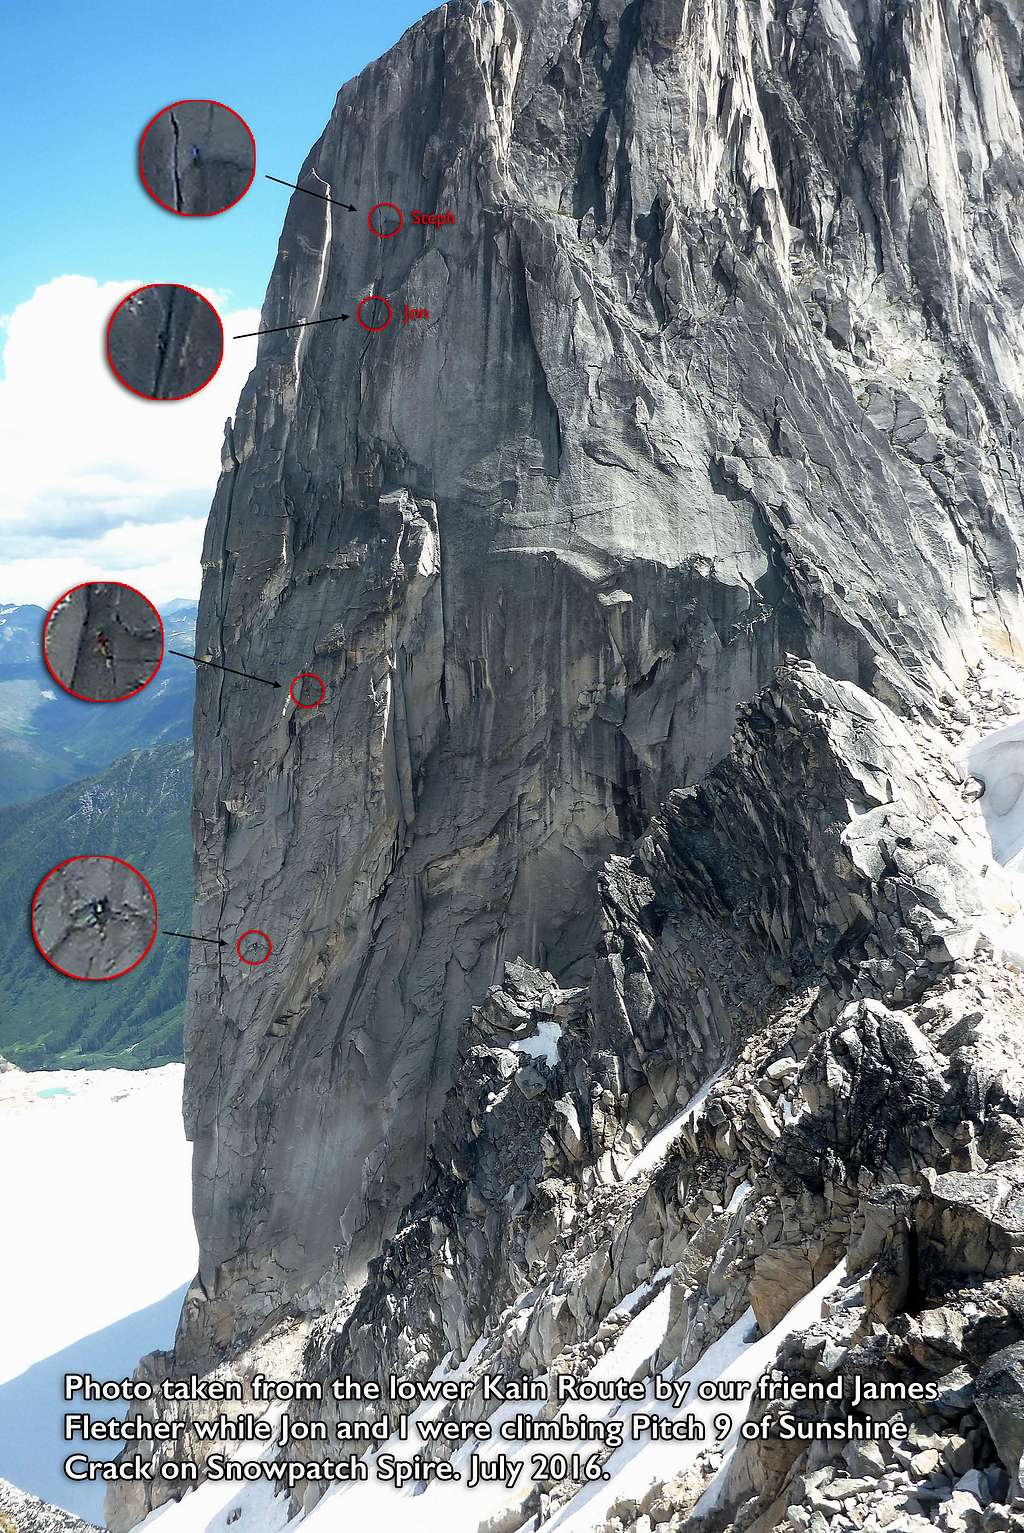 Climbers on Sunshine Crack on Snowpatch Spire